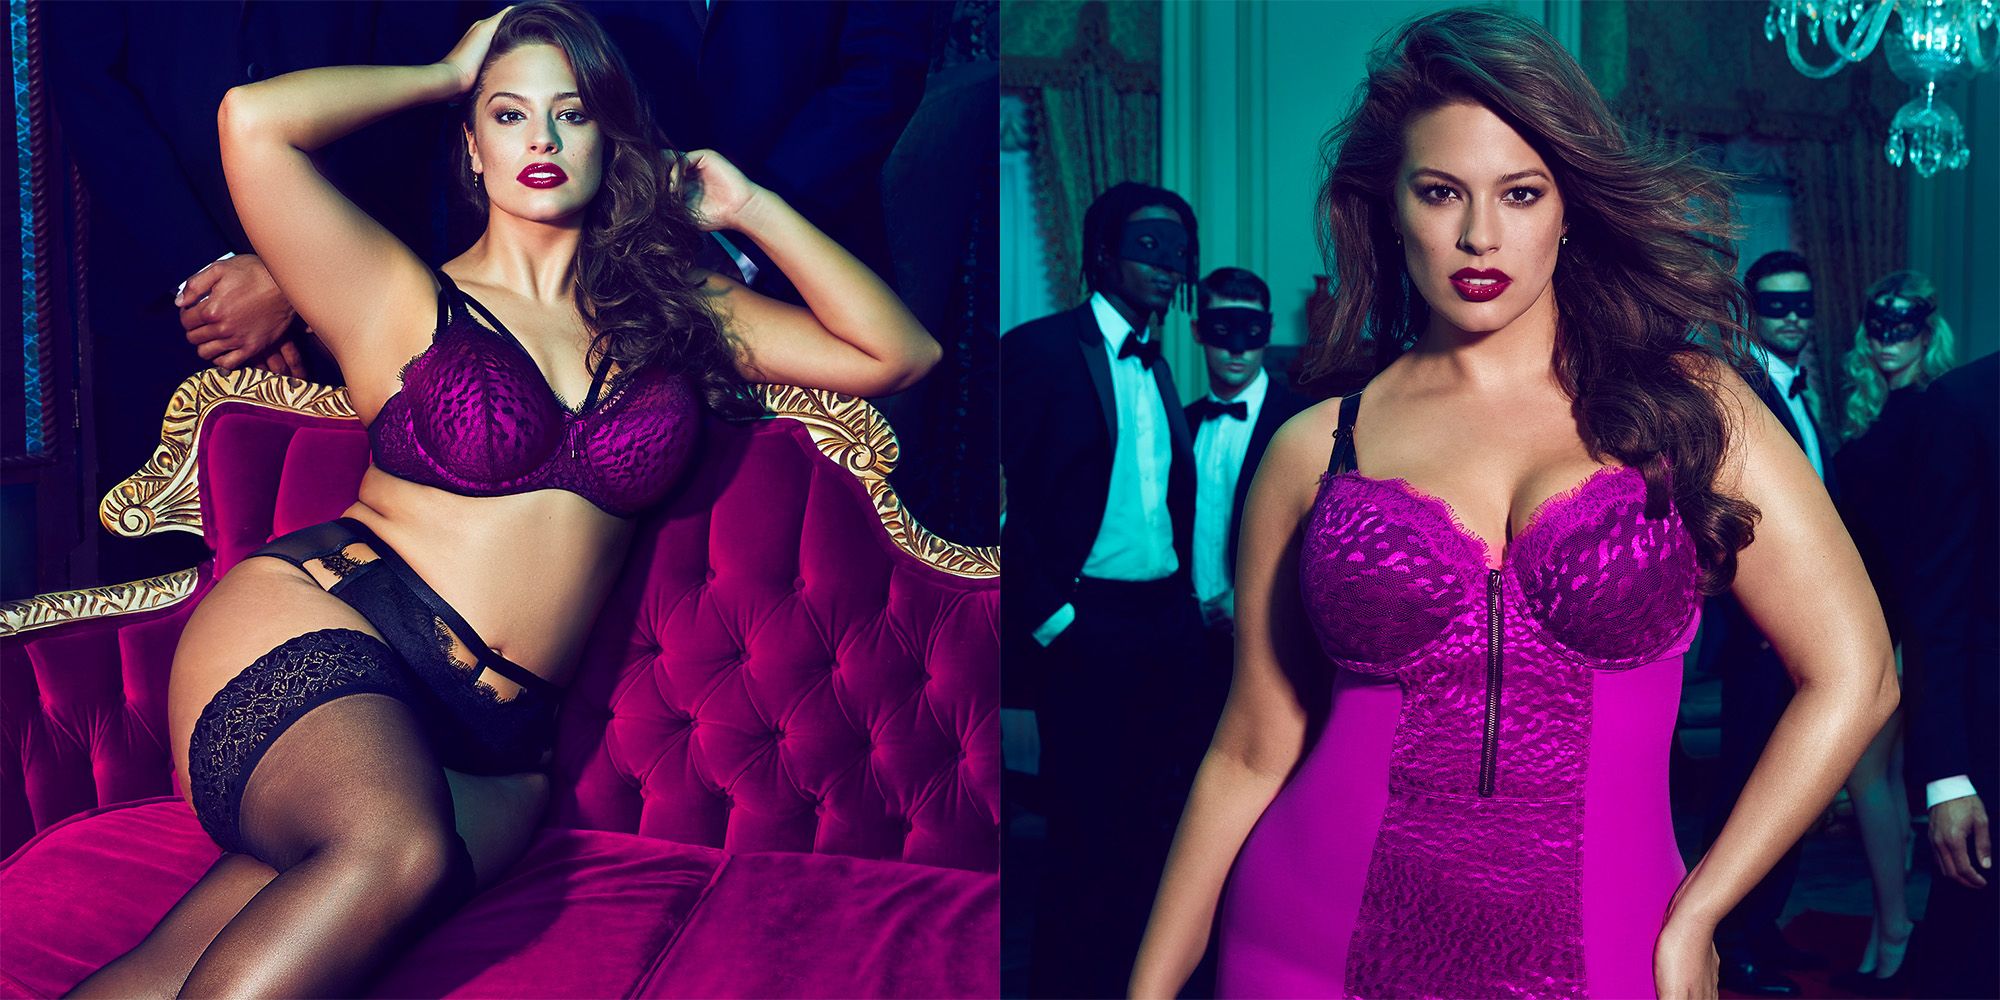 Ashley Graham's Sexy New Lingerie Ads Are Hot as Hell